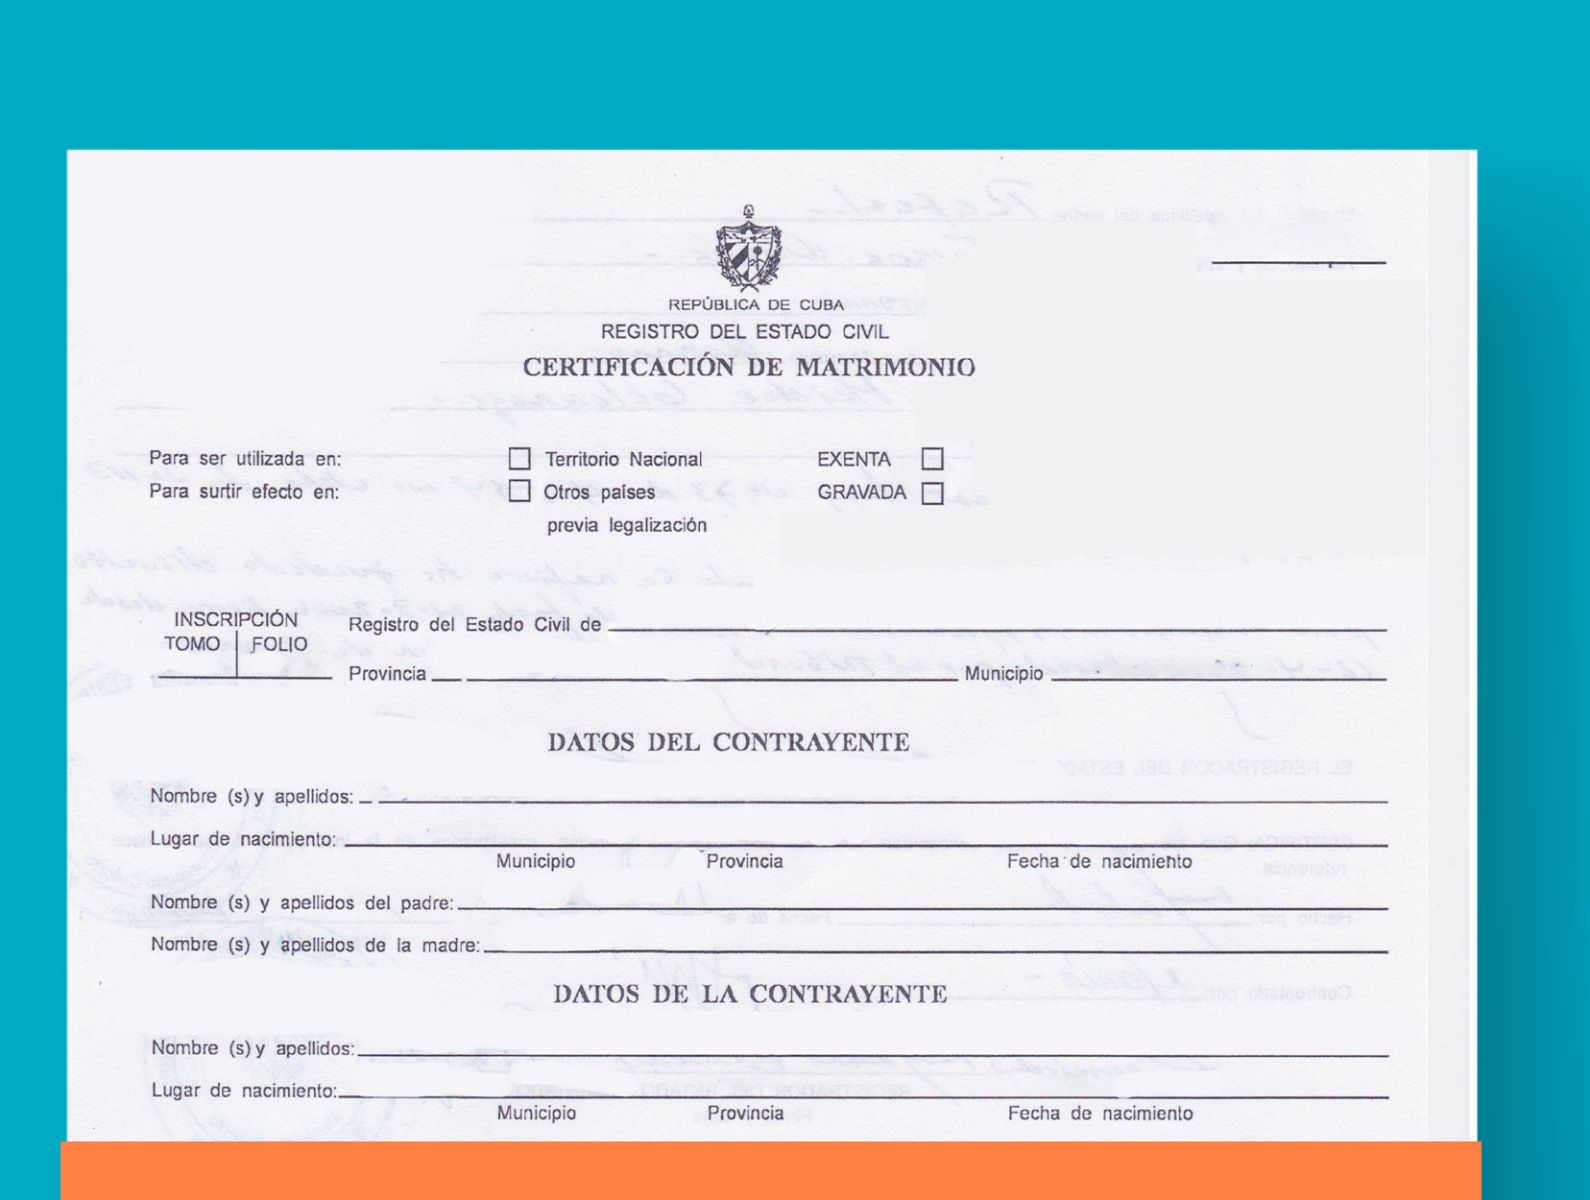 marriage-certificate-template-cuba-by-universal-translation-services-on-dribbble